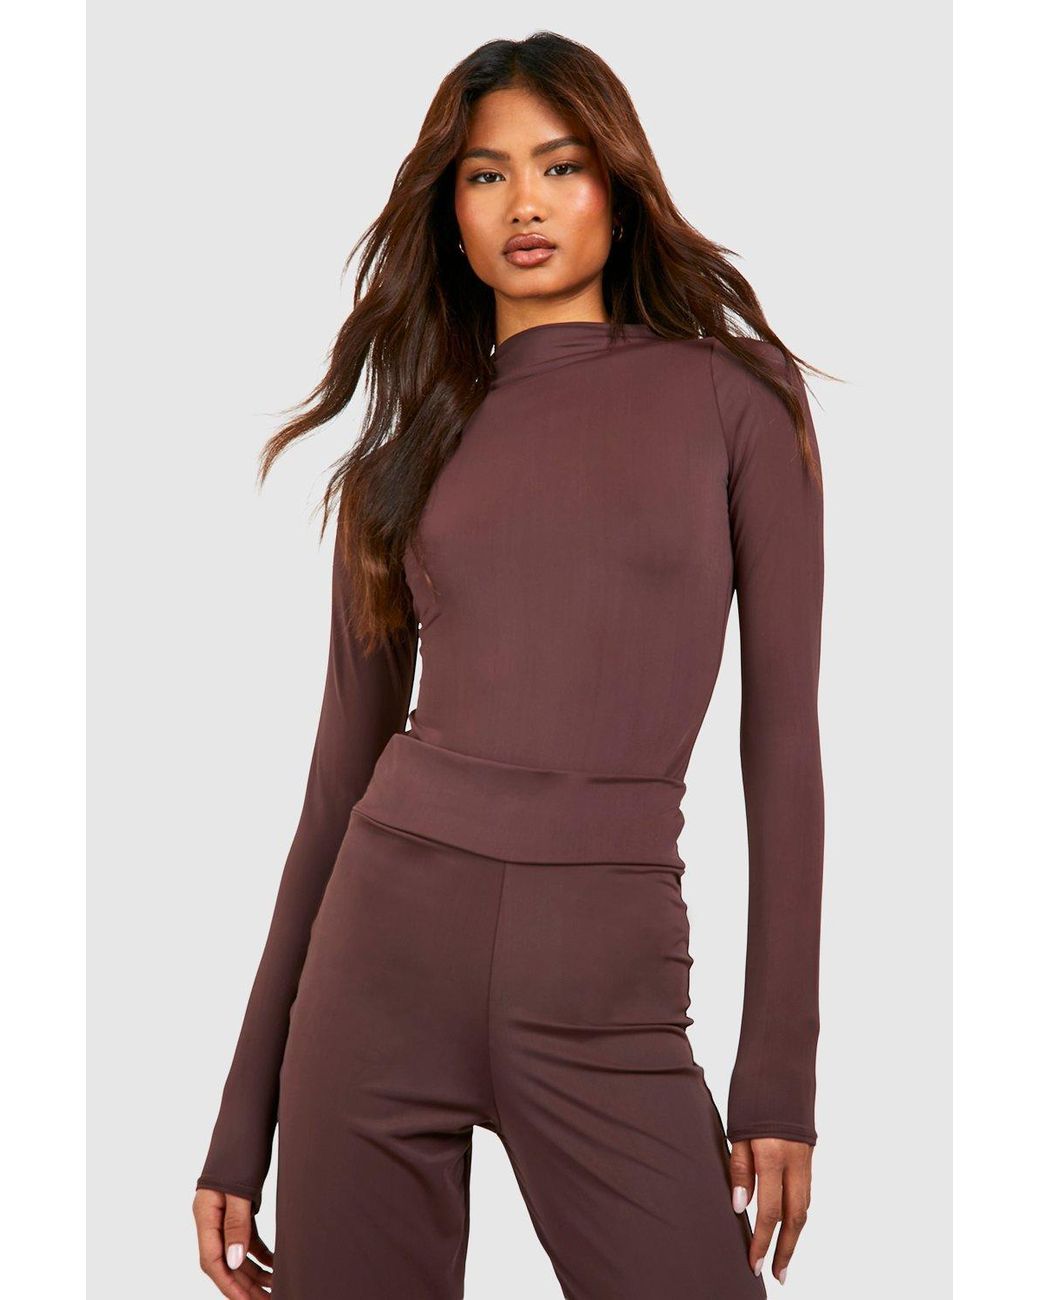 Buy Boohoo Tall Soft Ribbed Notch Neck Long Sleeves Bodysuit Top